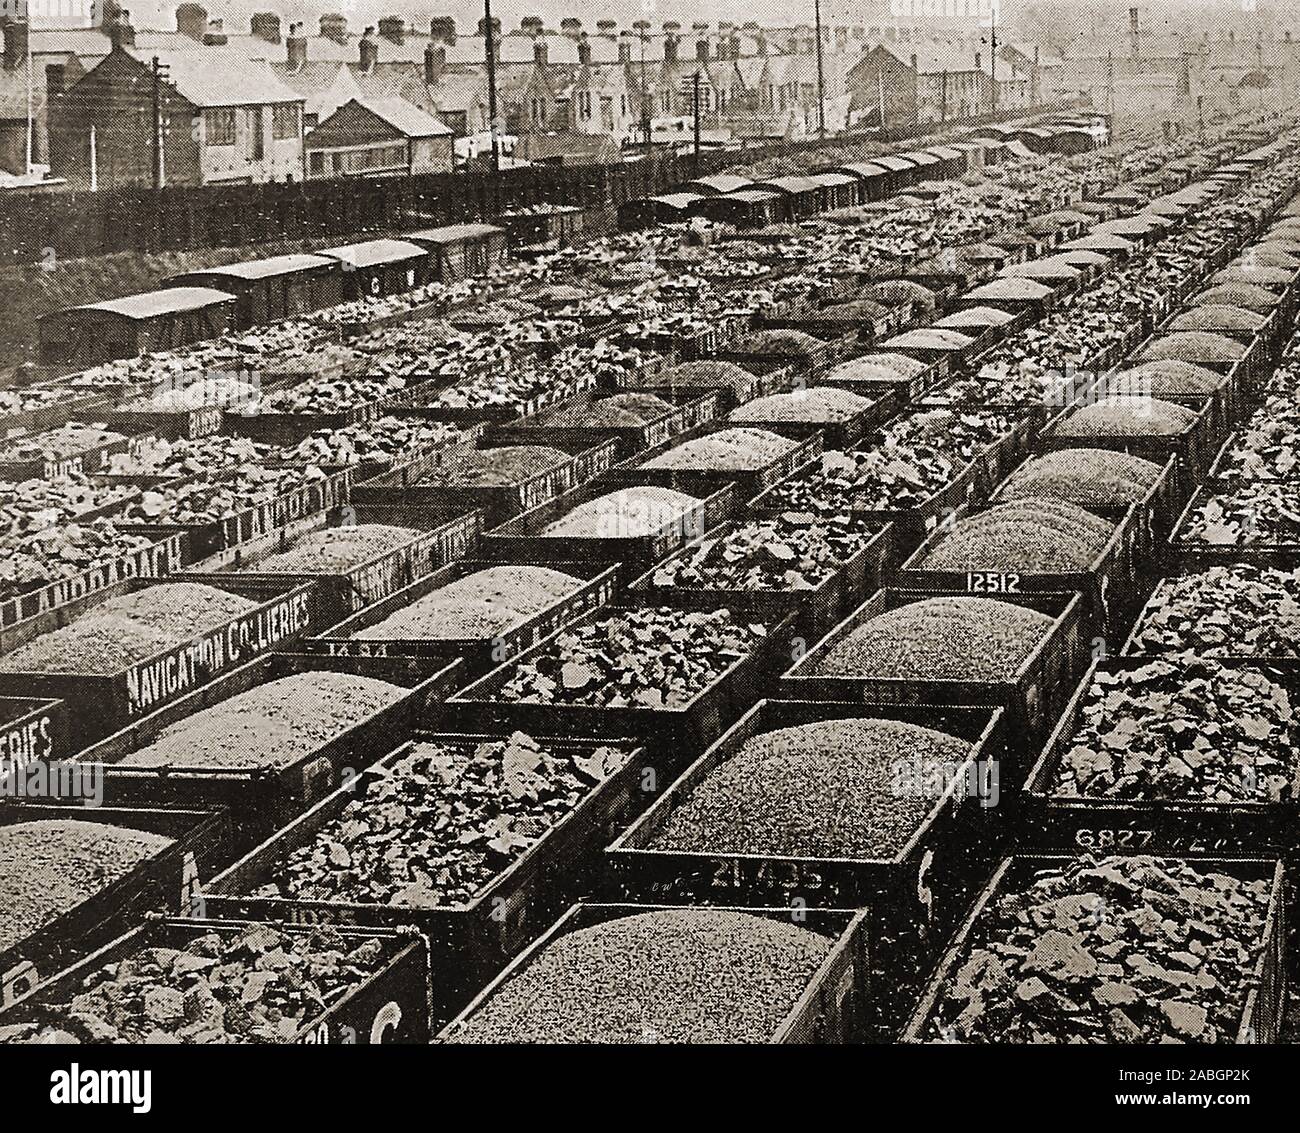 c1945 South Wales railway sidings with open wagons  filled with various grades of coal ready for delivery or export by train. Stock Photo